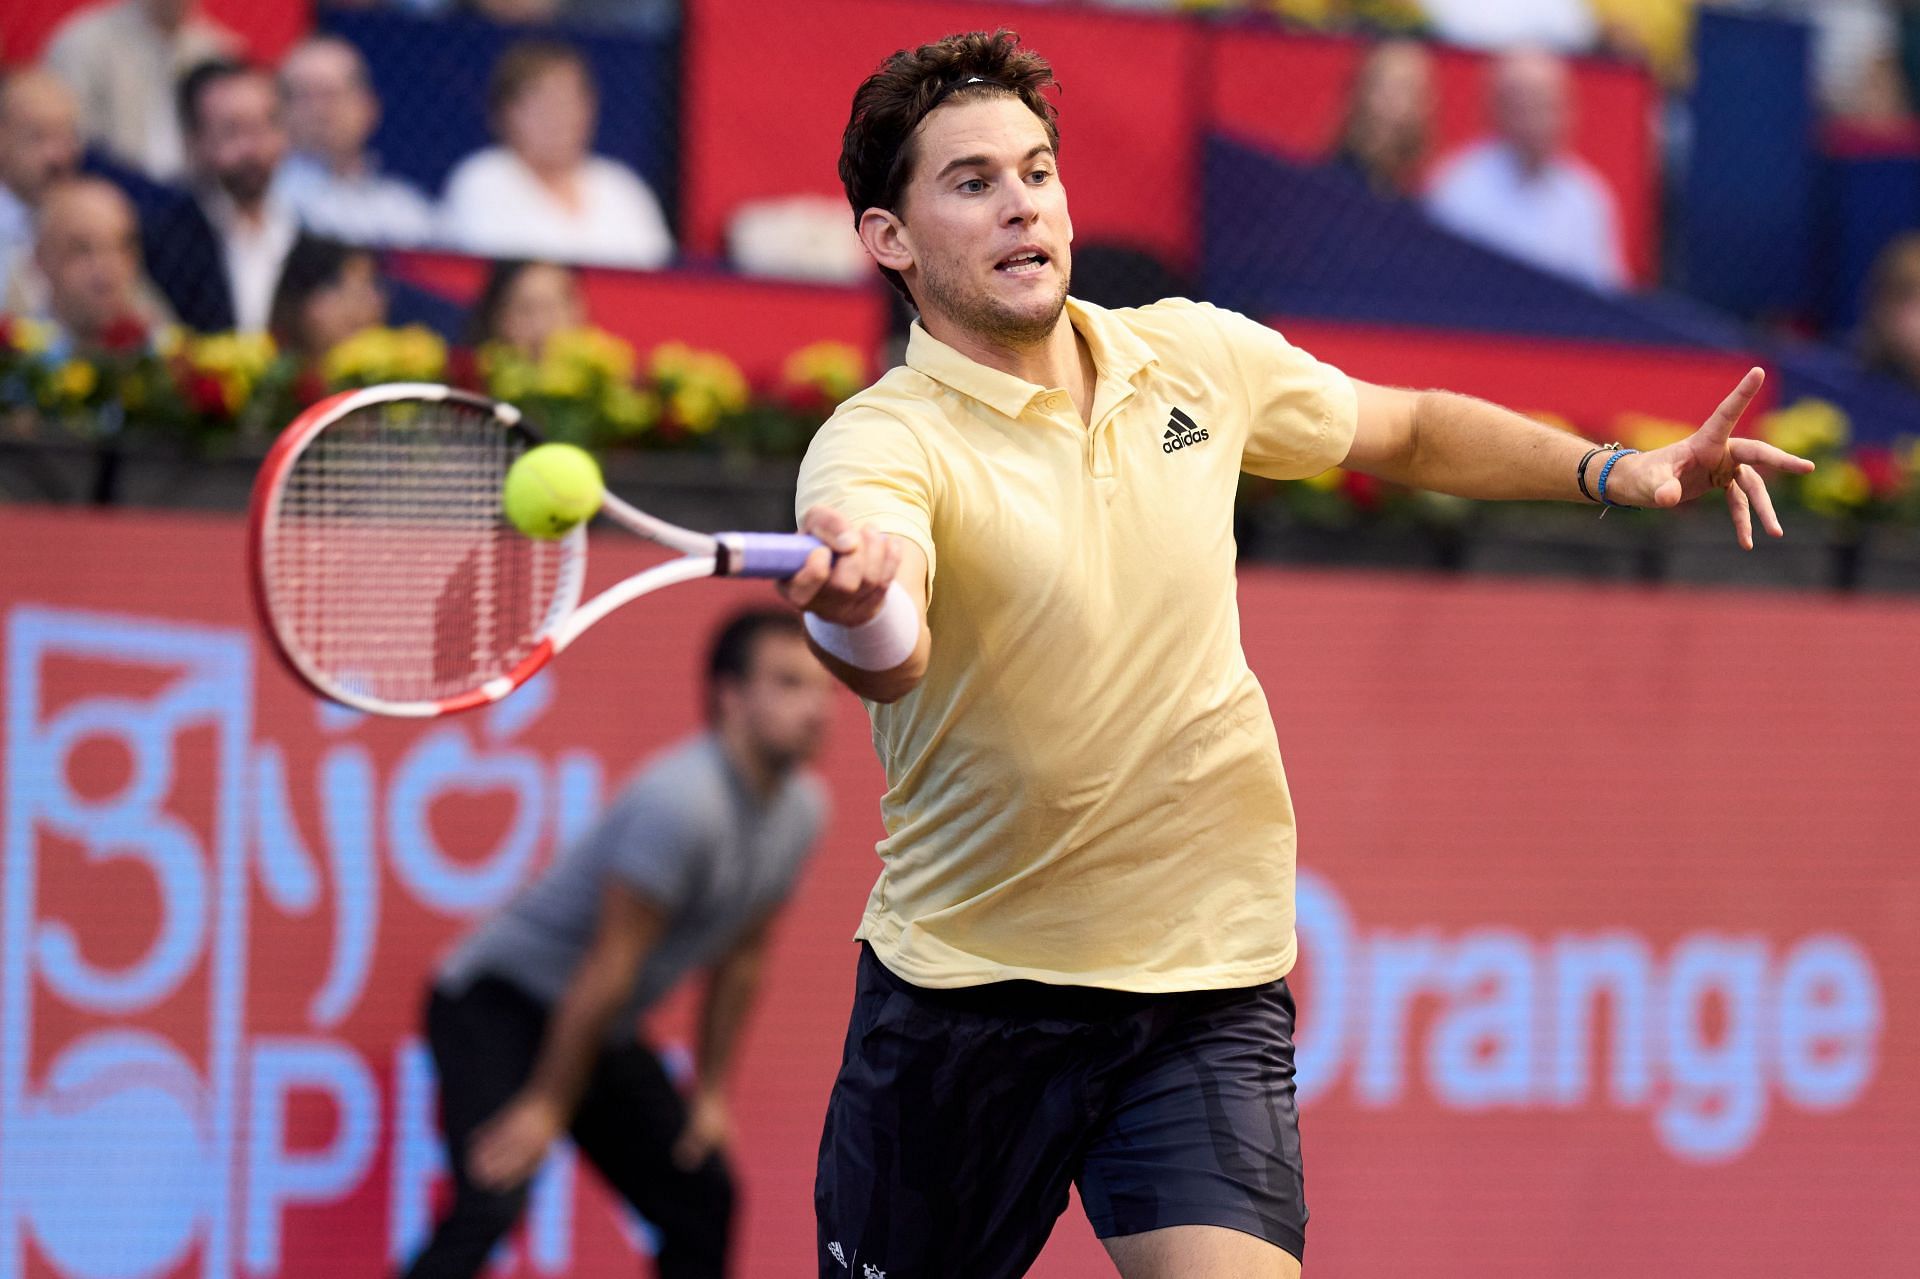 Dominic Thiem in action at the Gijon Open